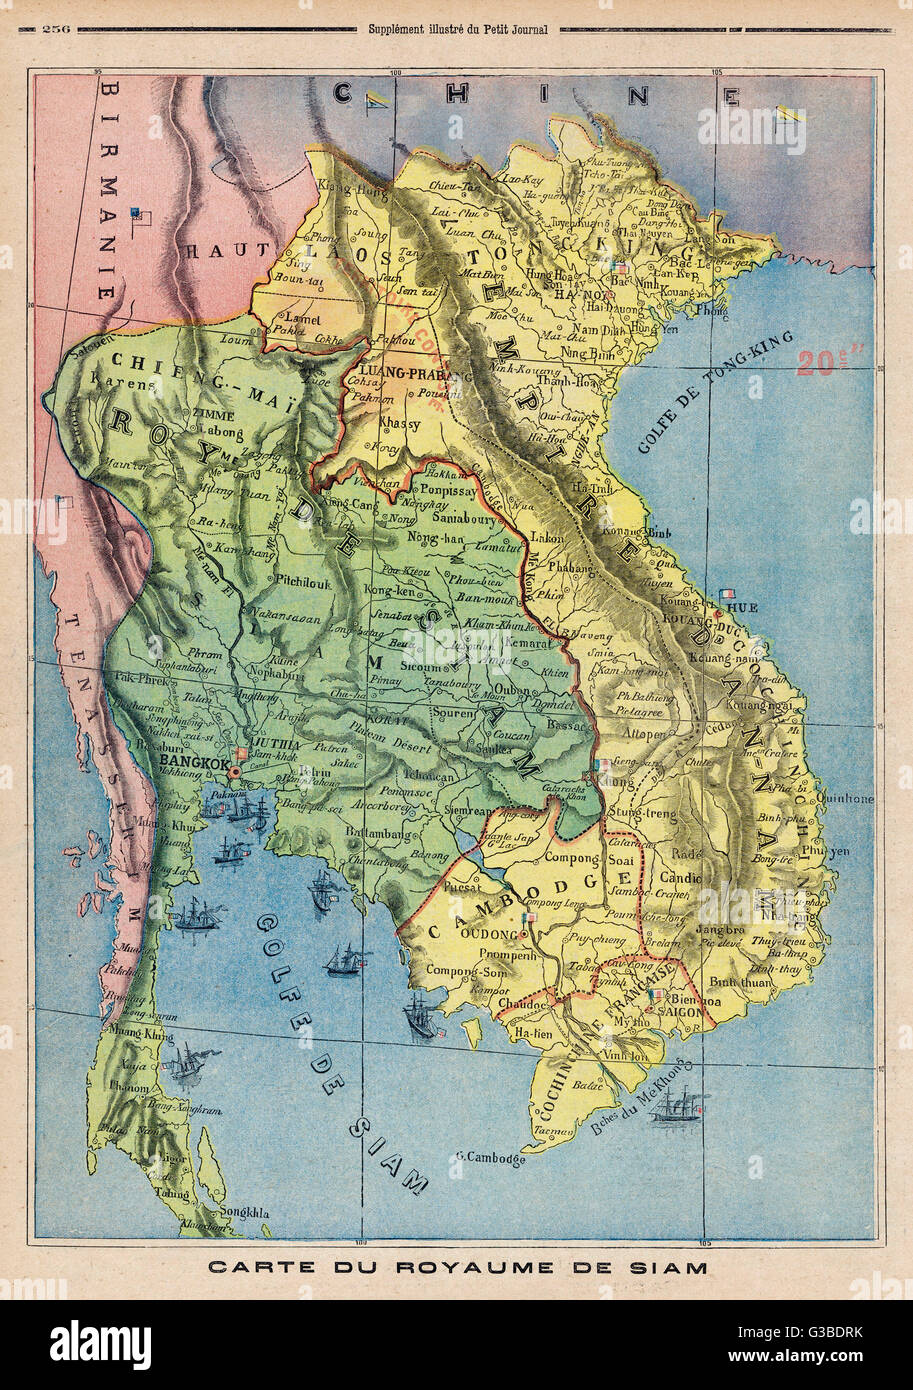 Map showing the Kingdom  of Siam, now Thailand.         Date: 1893 Stock Photo